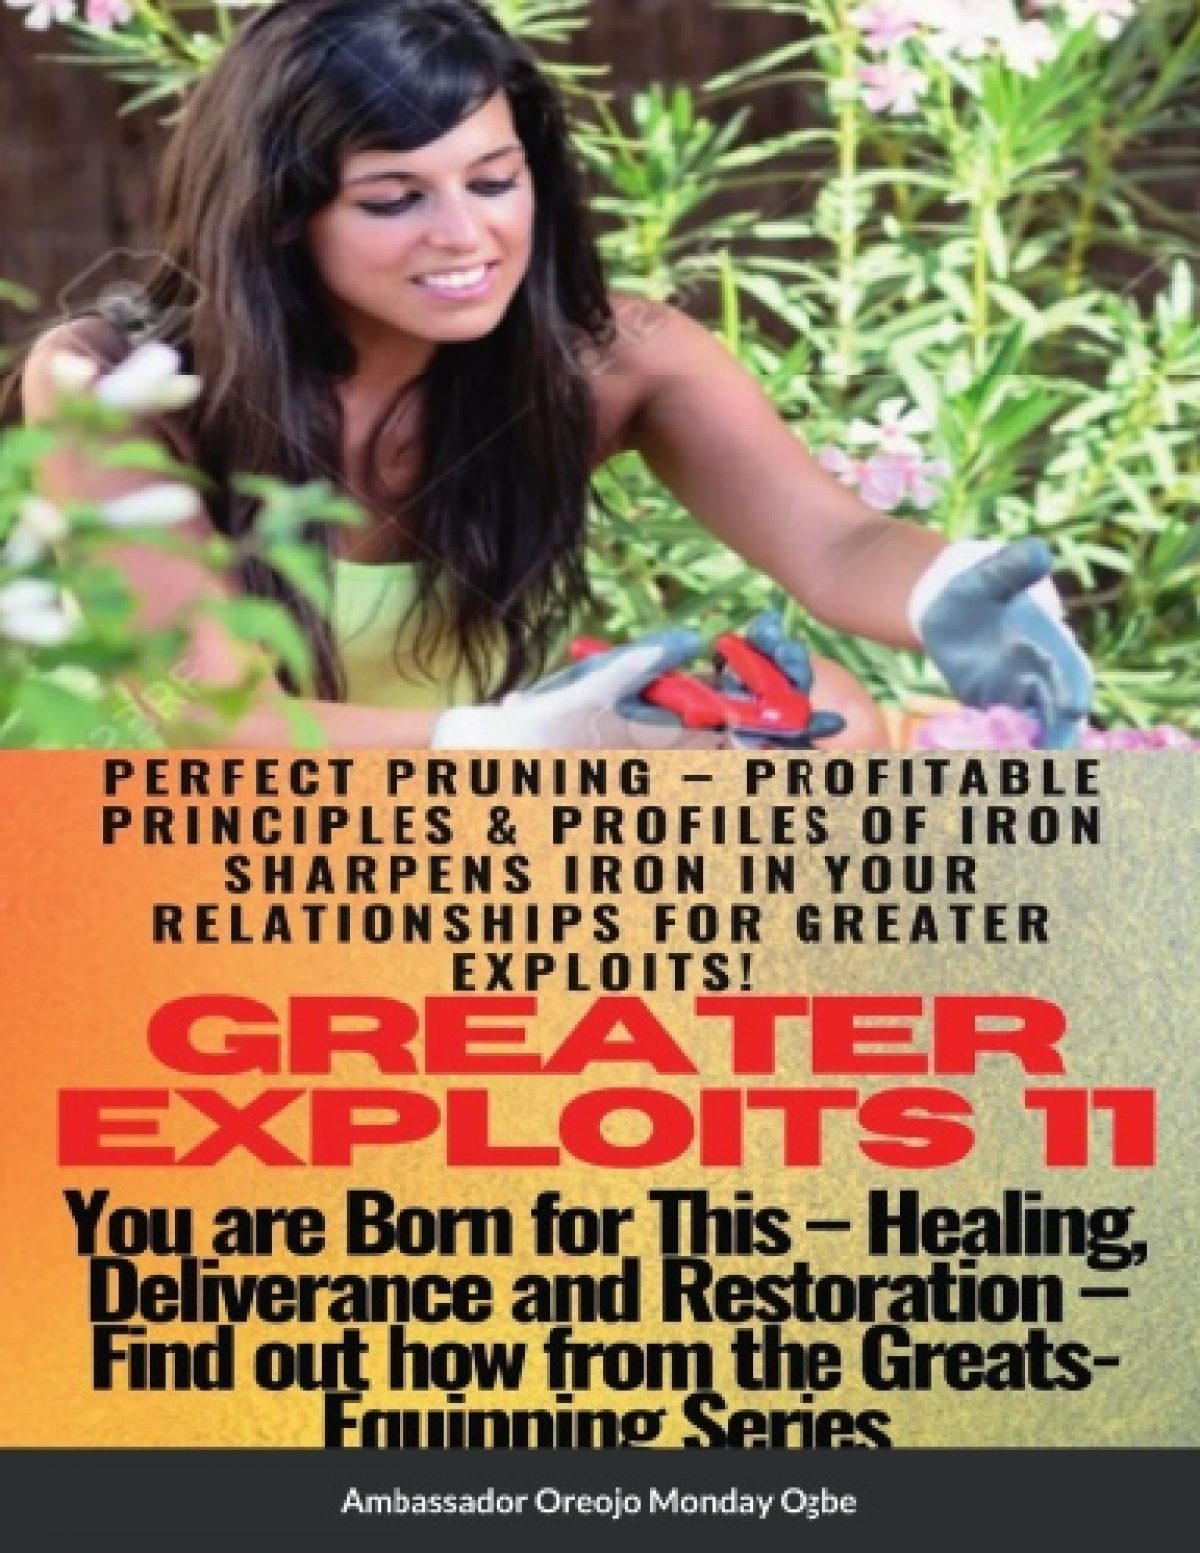 Greater Exploits 11 Paperback Edition – Perfect Pruning in YOUR RELATIONSHIPS – Healing, Deliverance and Restoration – You are Born For This!